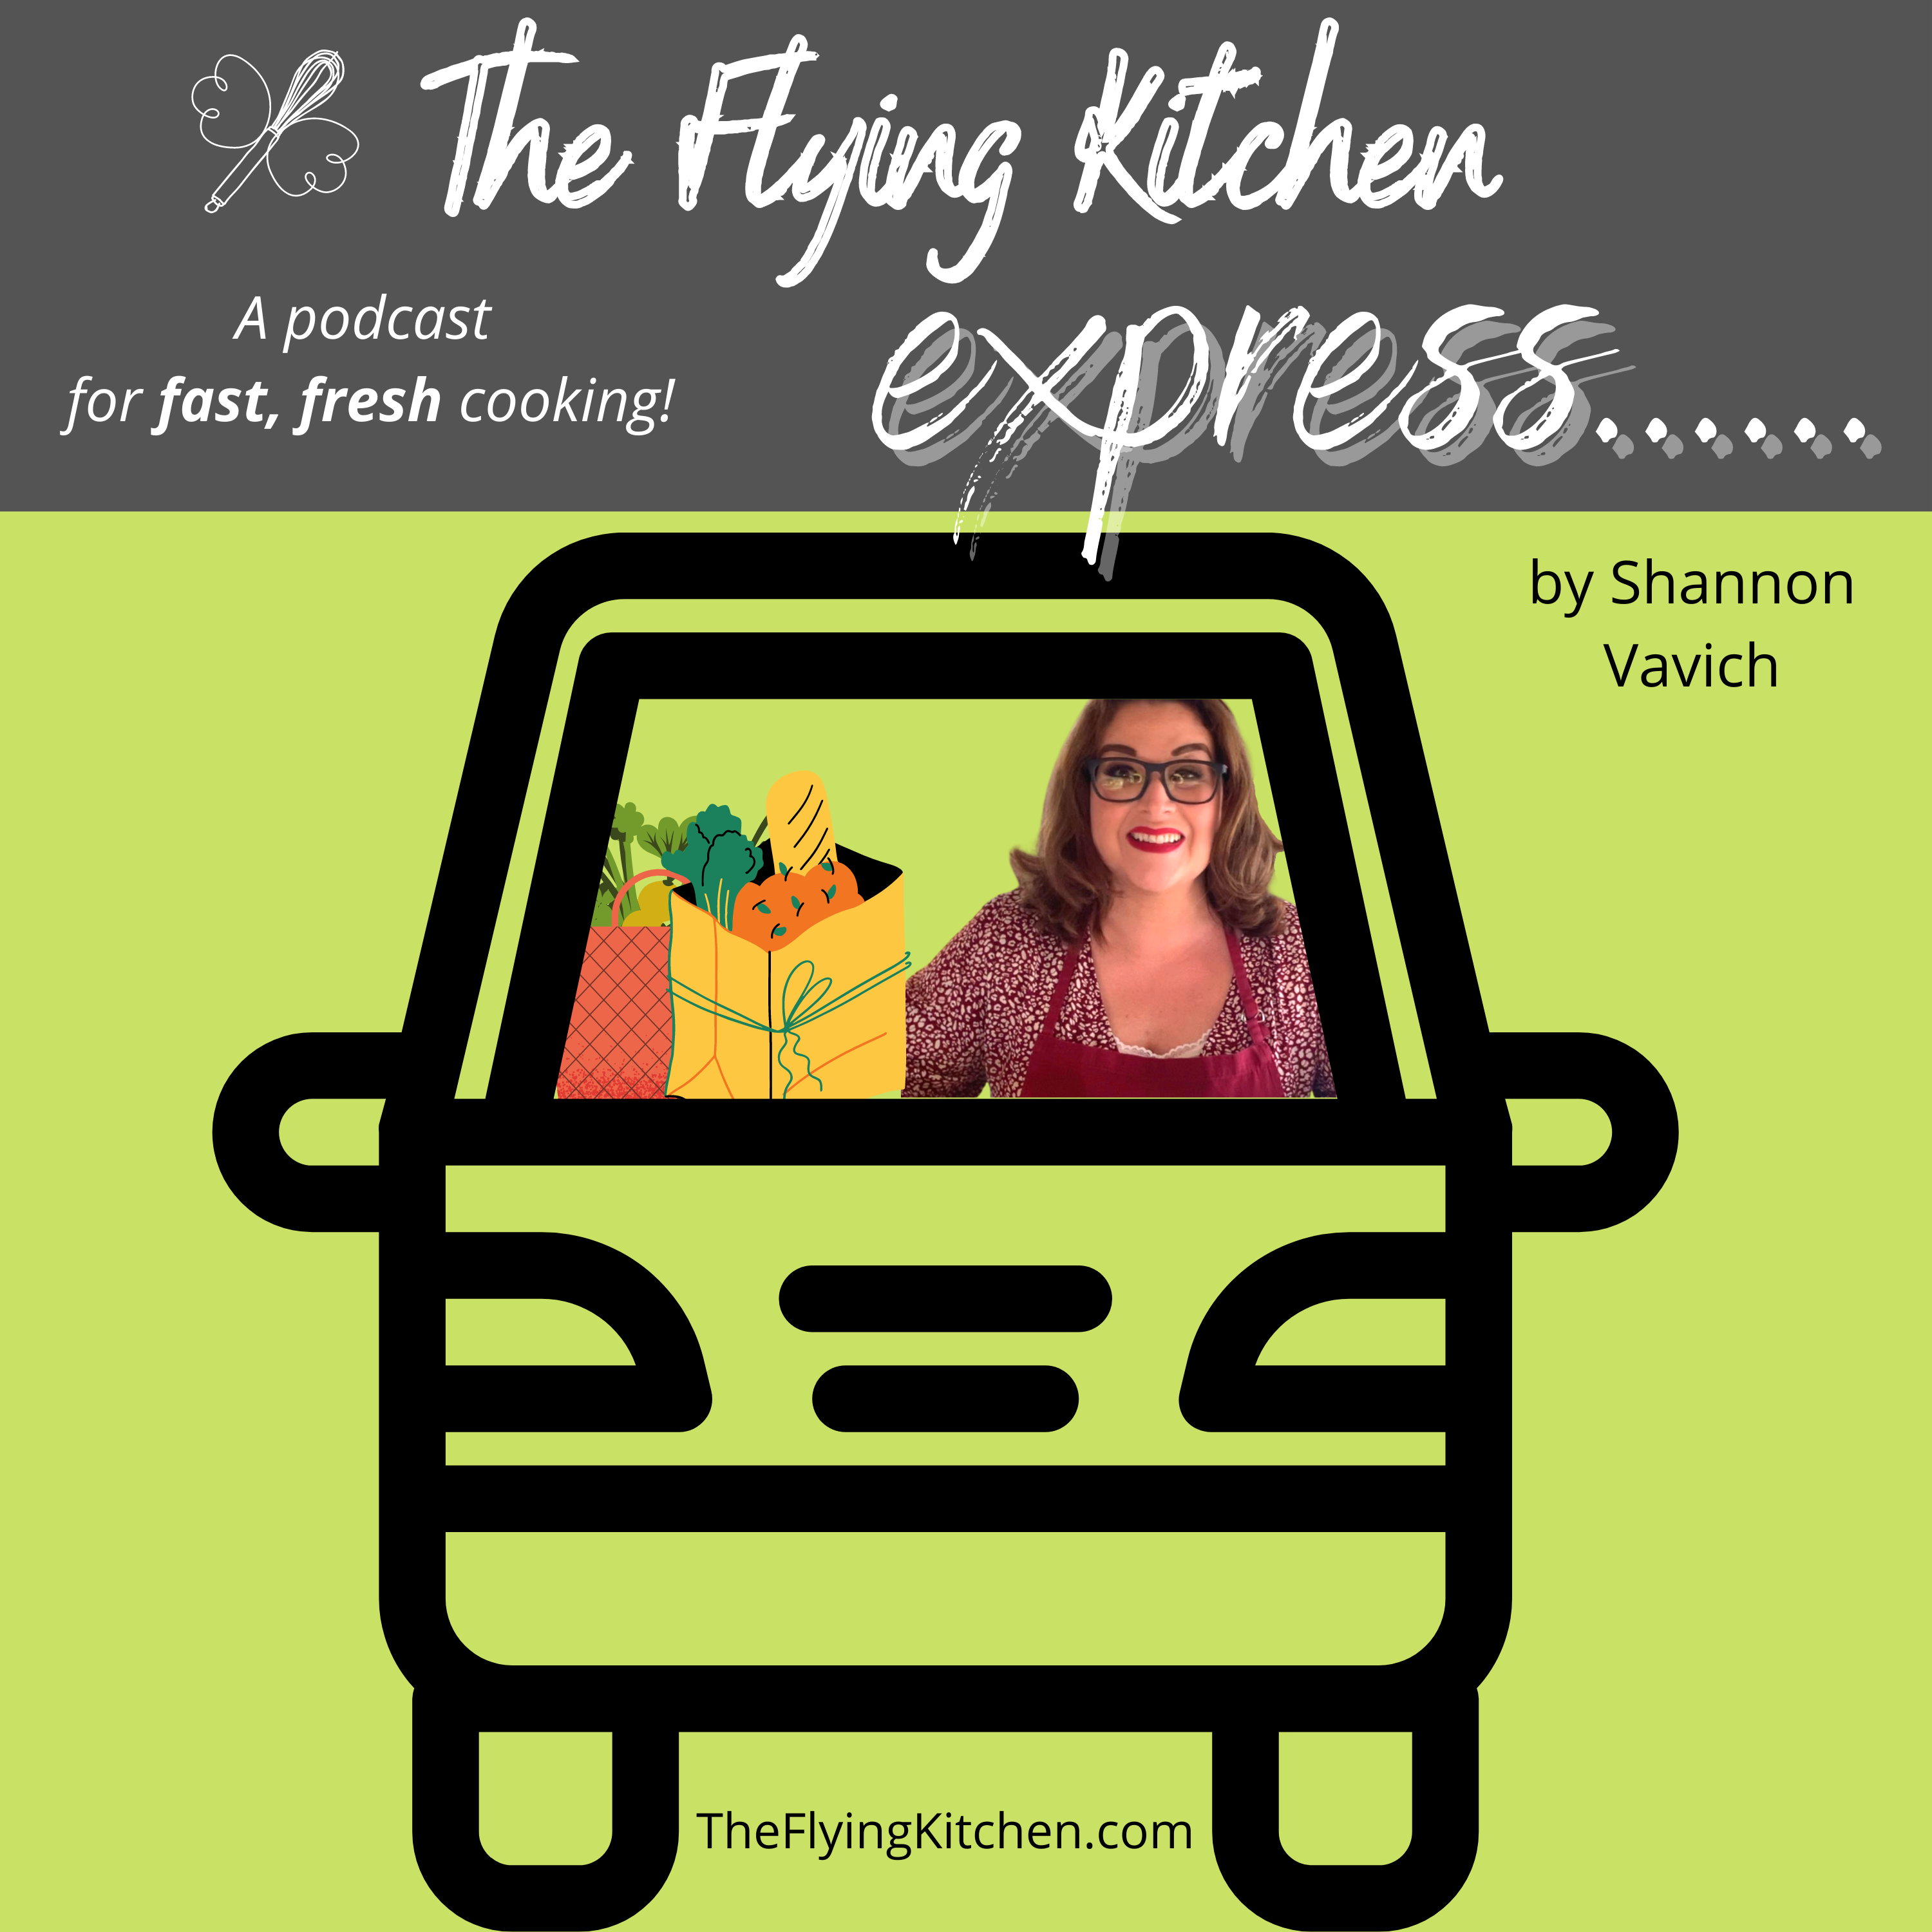 The Flying Kitchen EXPRESS!